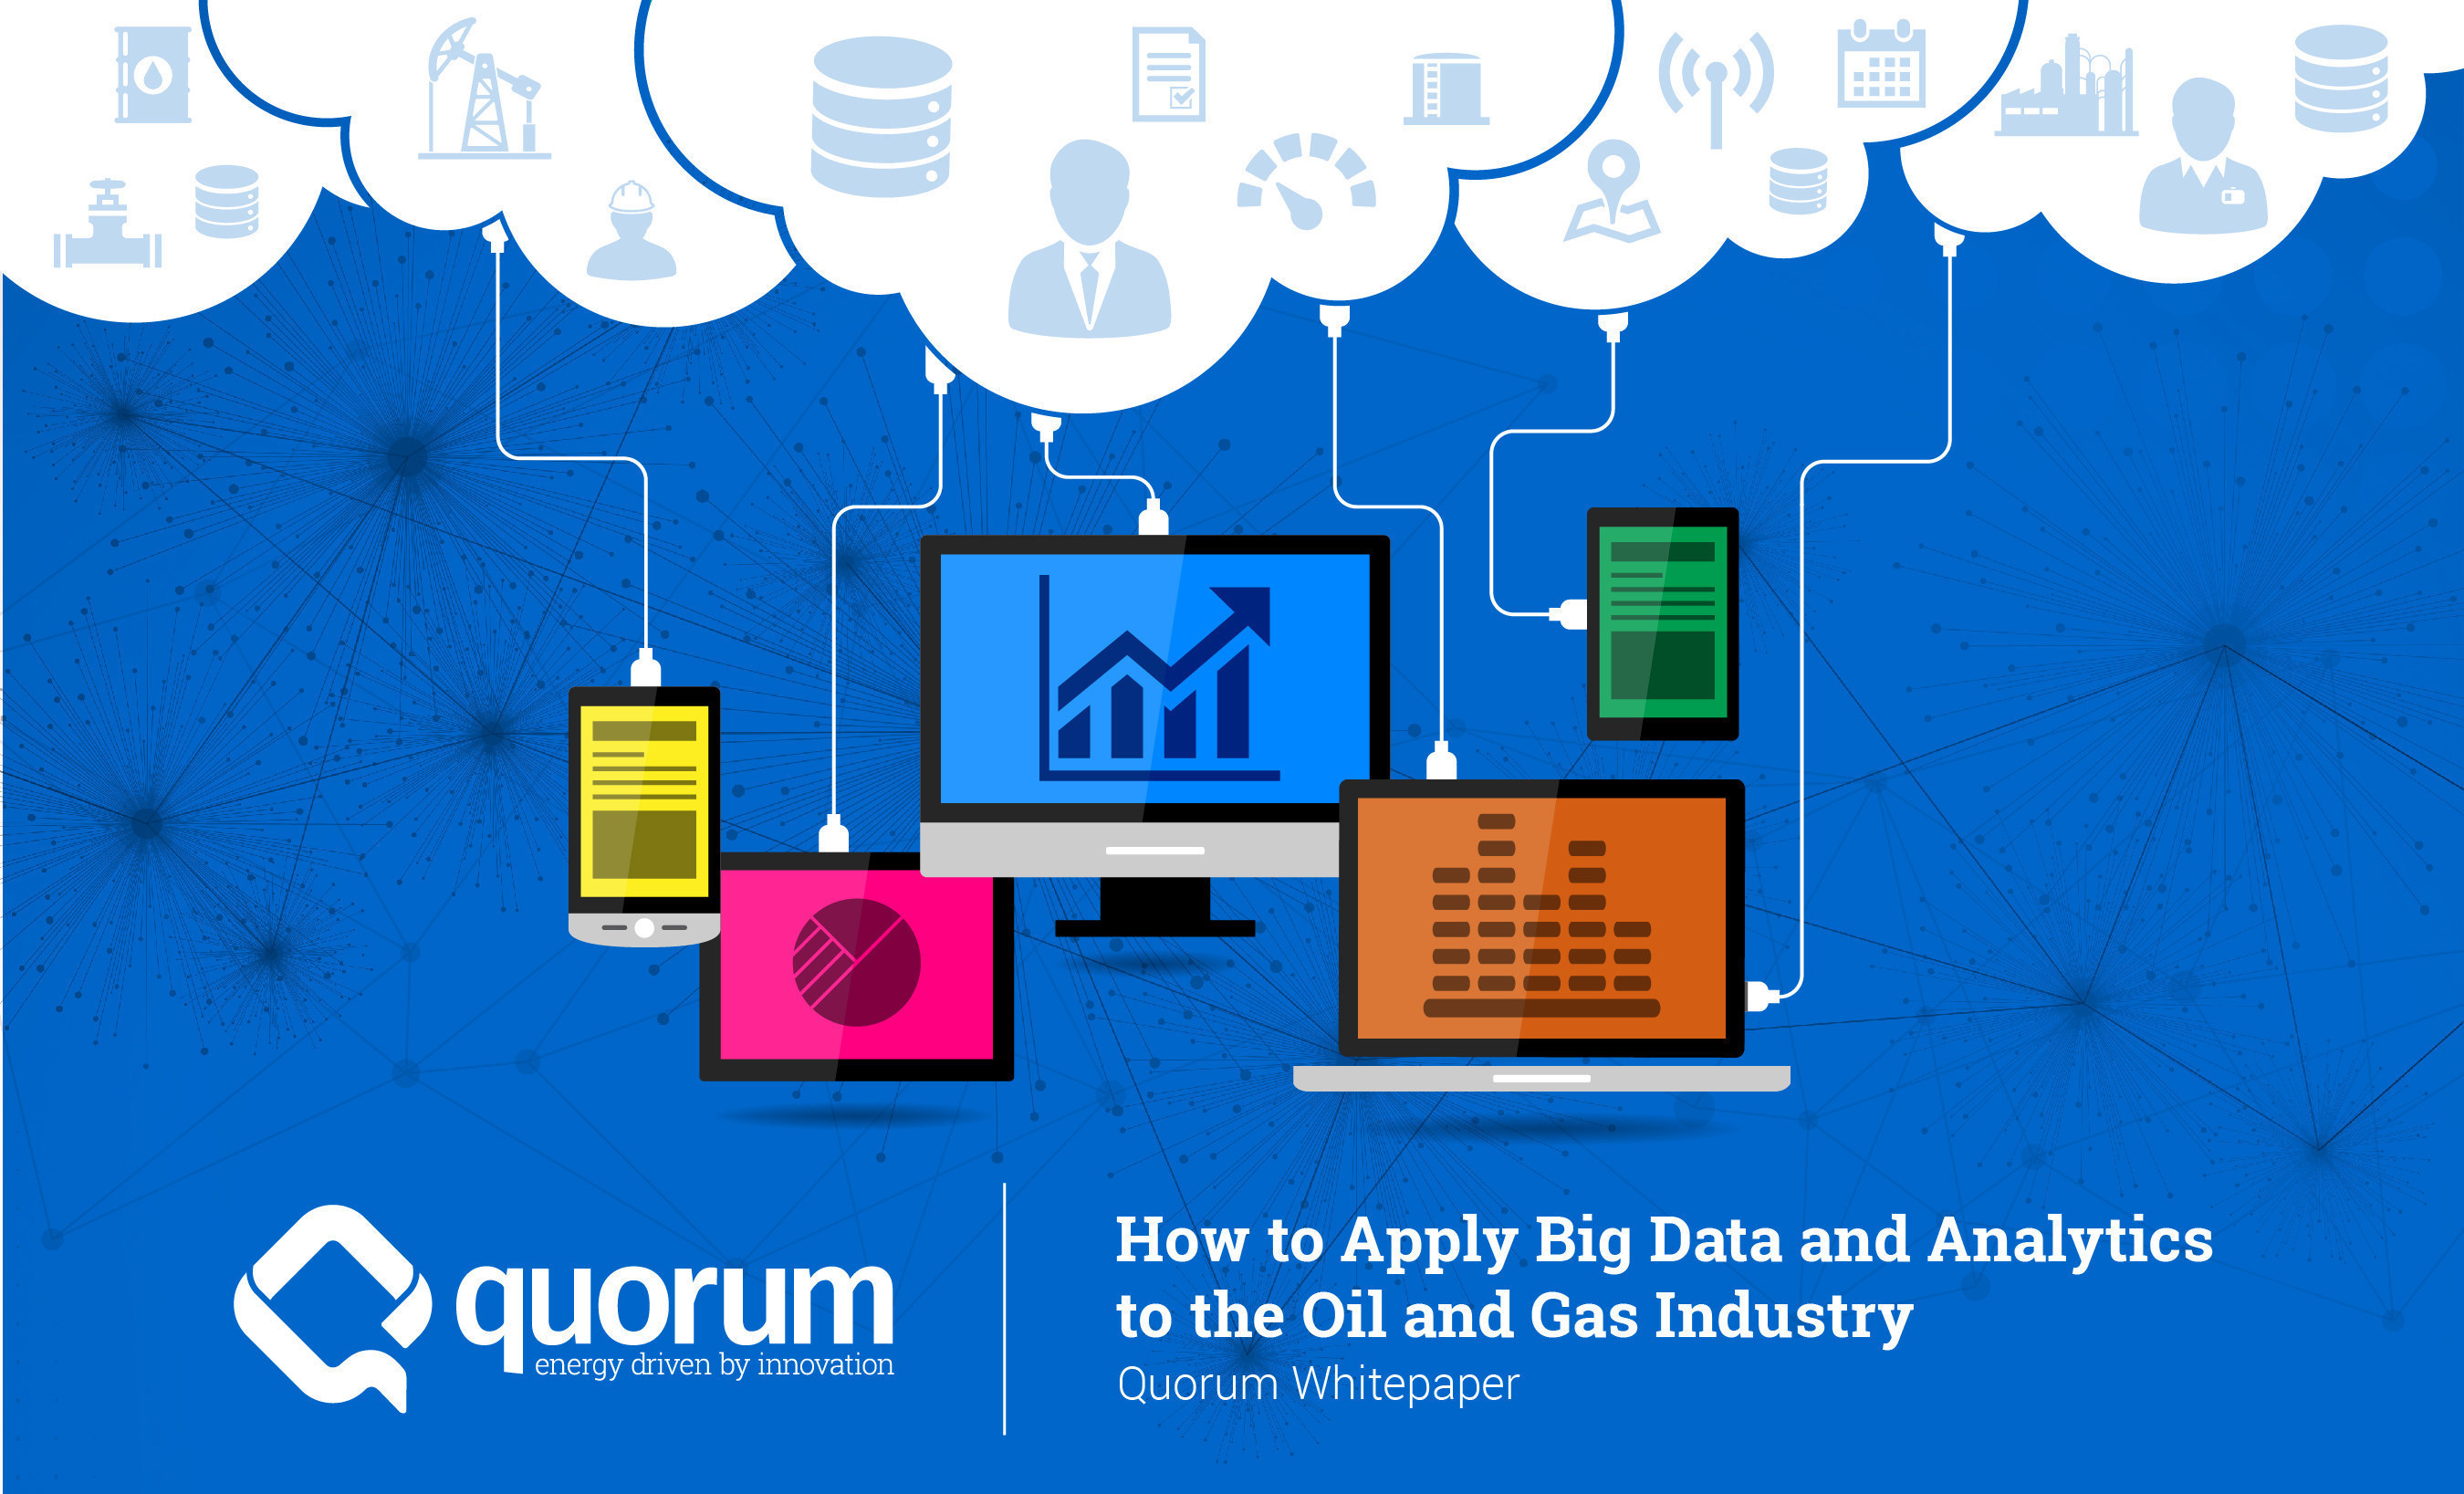 Oil and gas companies can achieve connected energy intelligence by adopting and applying digital technologies. Data can prevent huge losses in production by removing operational silos, reducing downtime, eliminating errors, and minimizing risk.Read the latest whitepaper from Quorum to learn how to apply big data and advanced analytics across every segment of the oil and gas industry. Get your free copy today by visiting qbsol.com